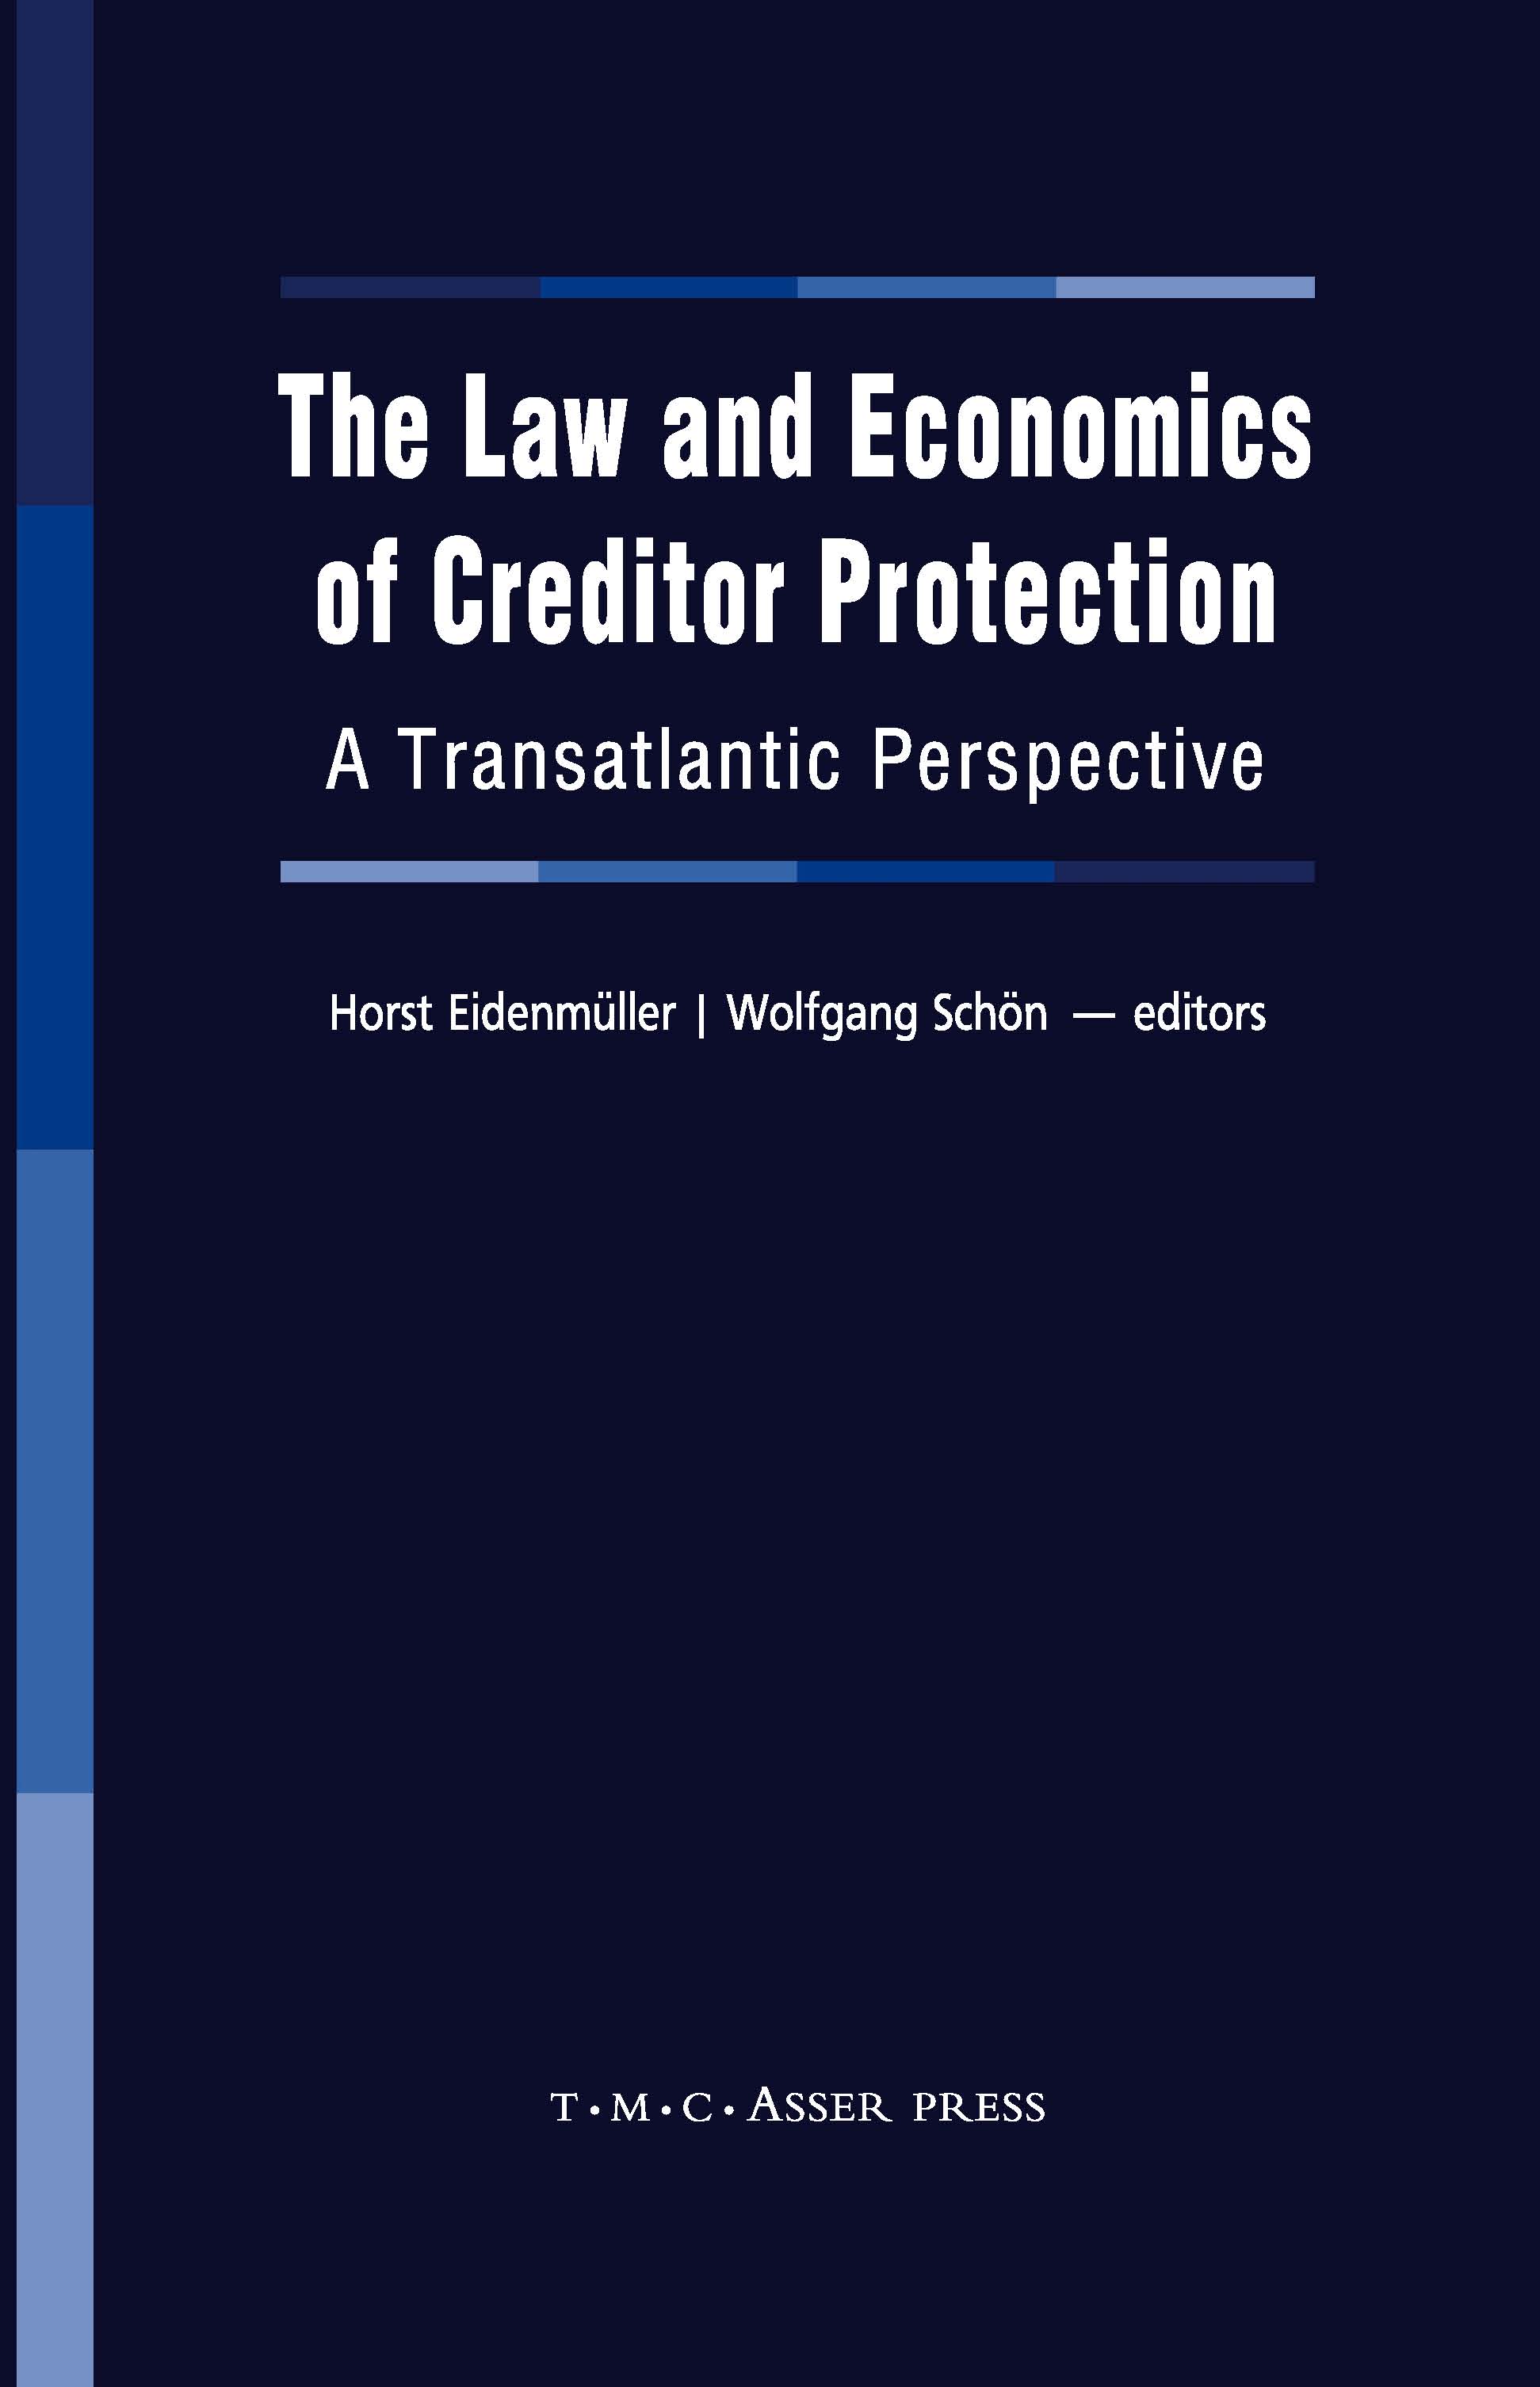 The Law and Economics of Creditor Protection - A Transatlantic Perspective